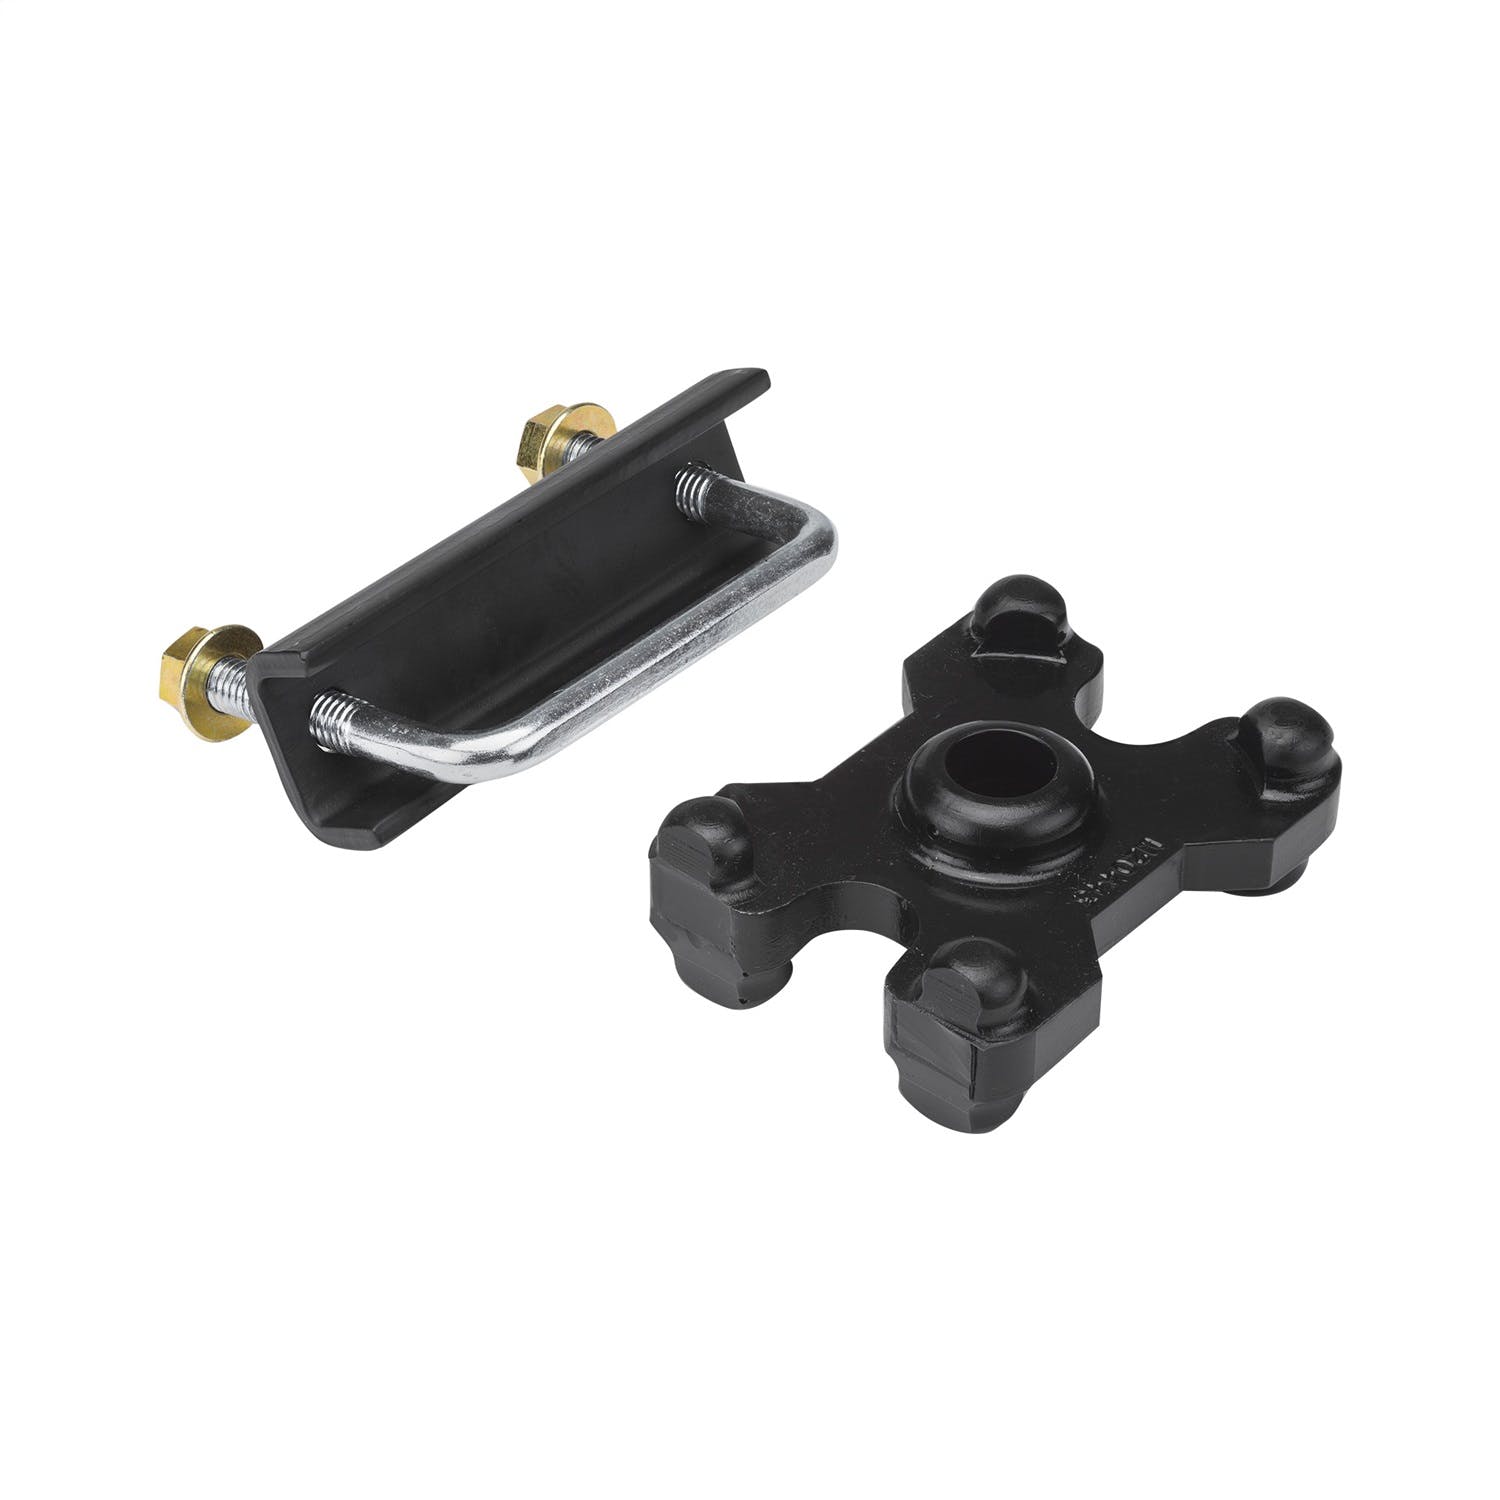 SuperSprings P7KT Mounting Kit used for specified SuperSprings applications